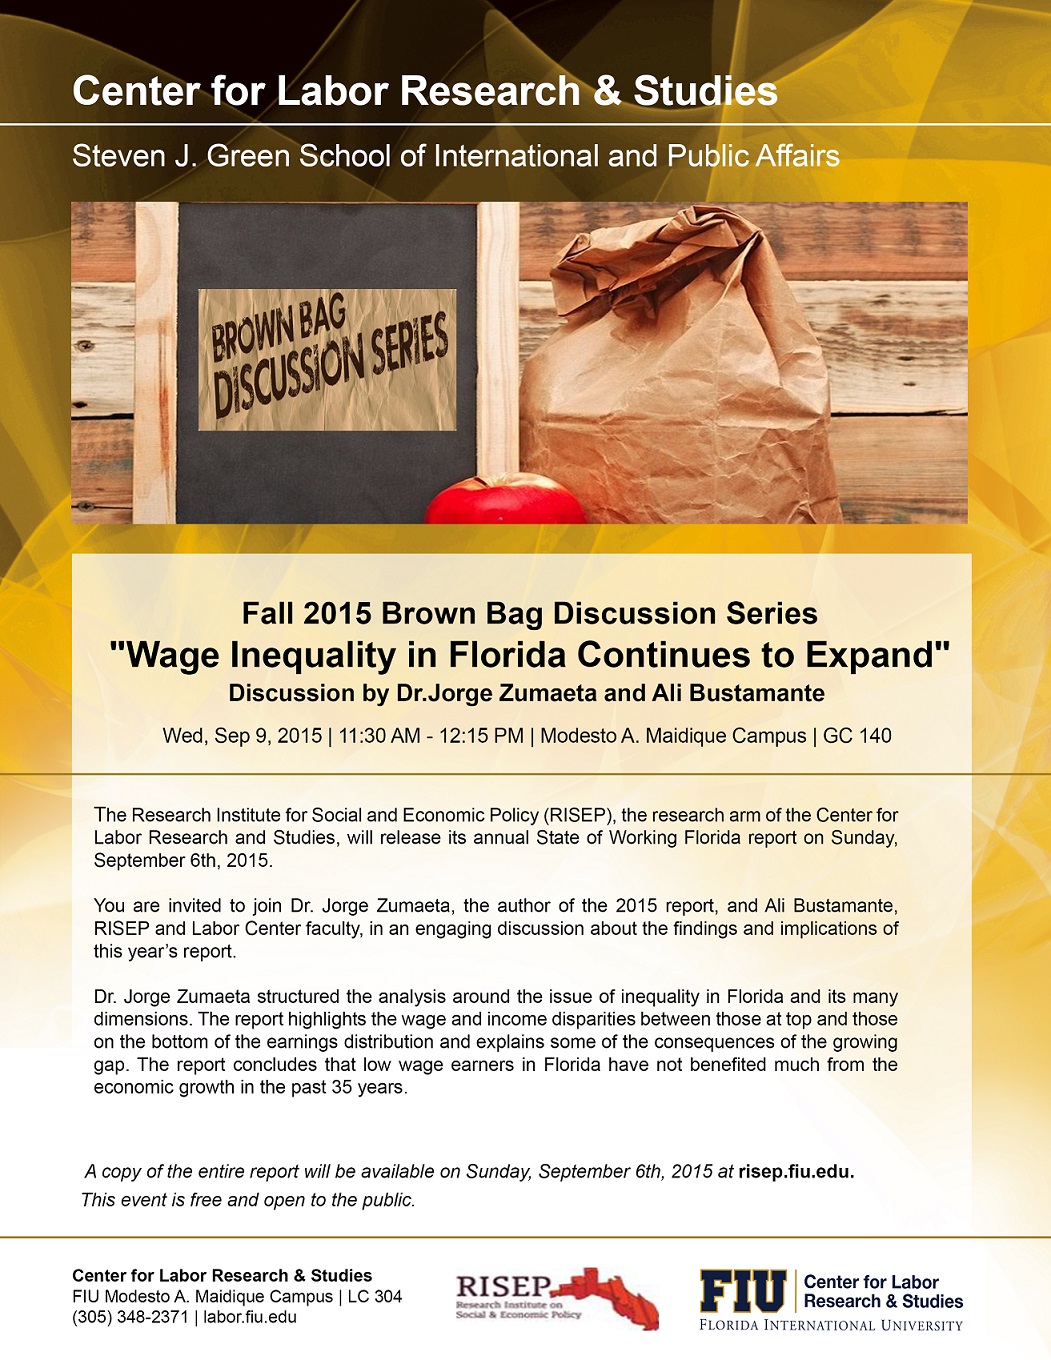 “Wage Inequality in Florida Continues to Expand”